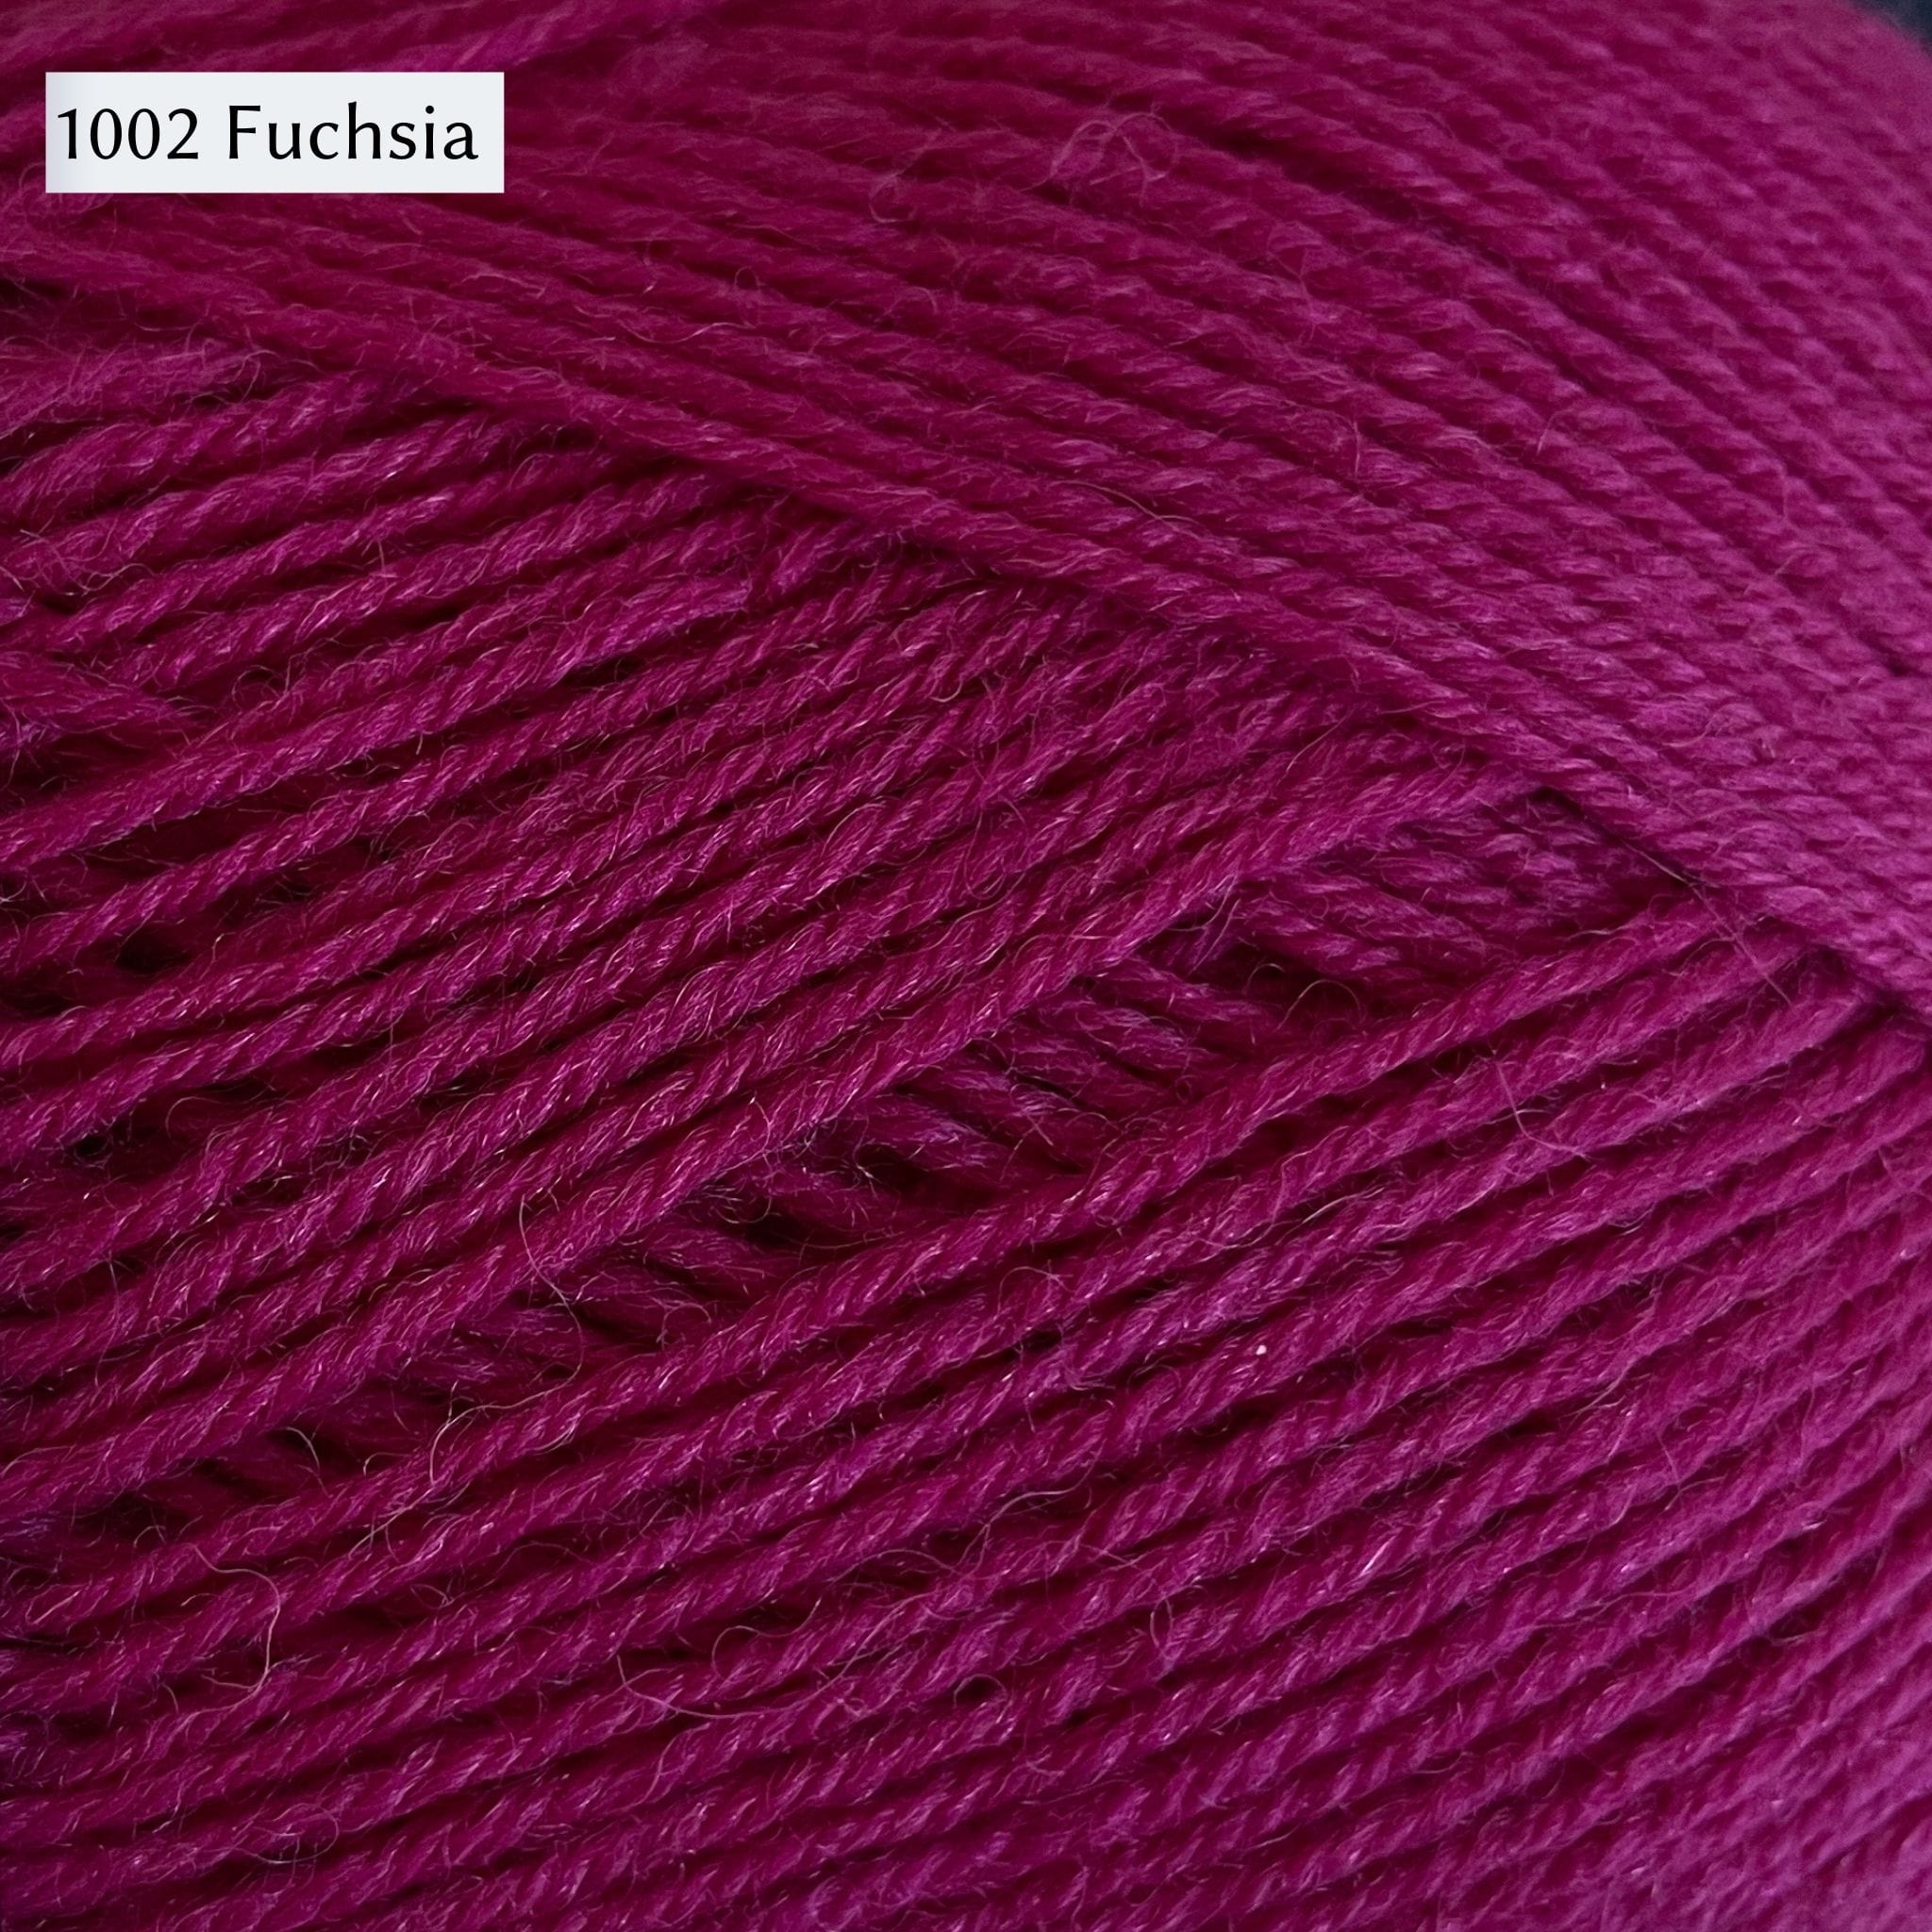 West Yorkshire Spinners Signature 4ply yarn, 100-gram ball, fingering weight, in color 1002 Fuschia, a saturated cool red color